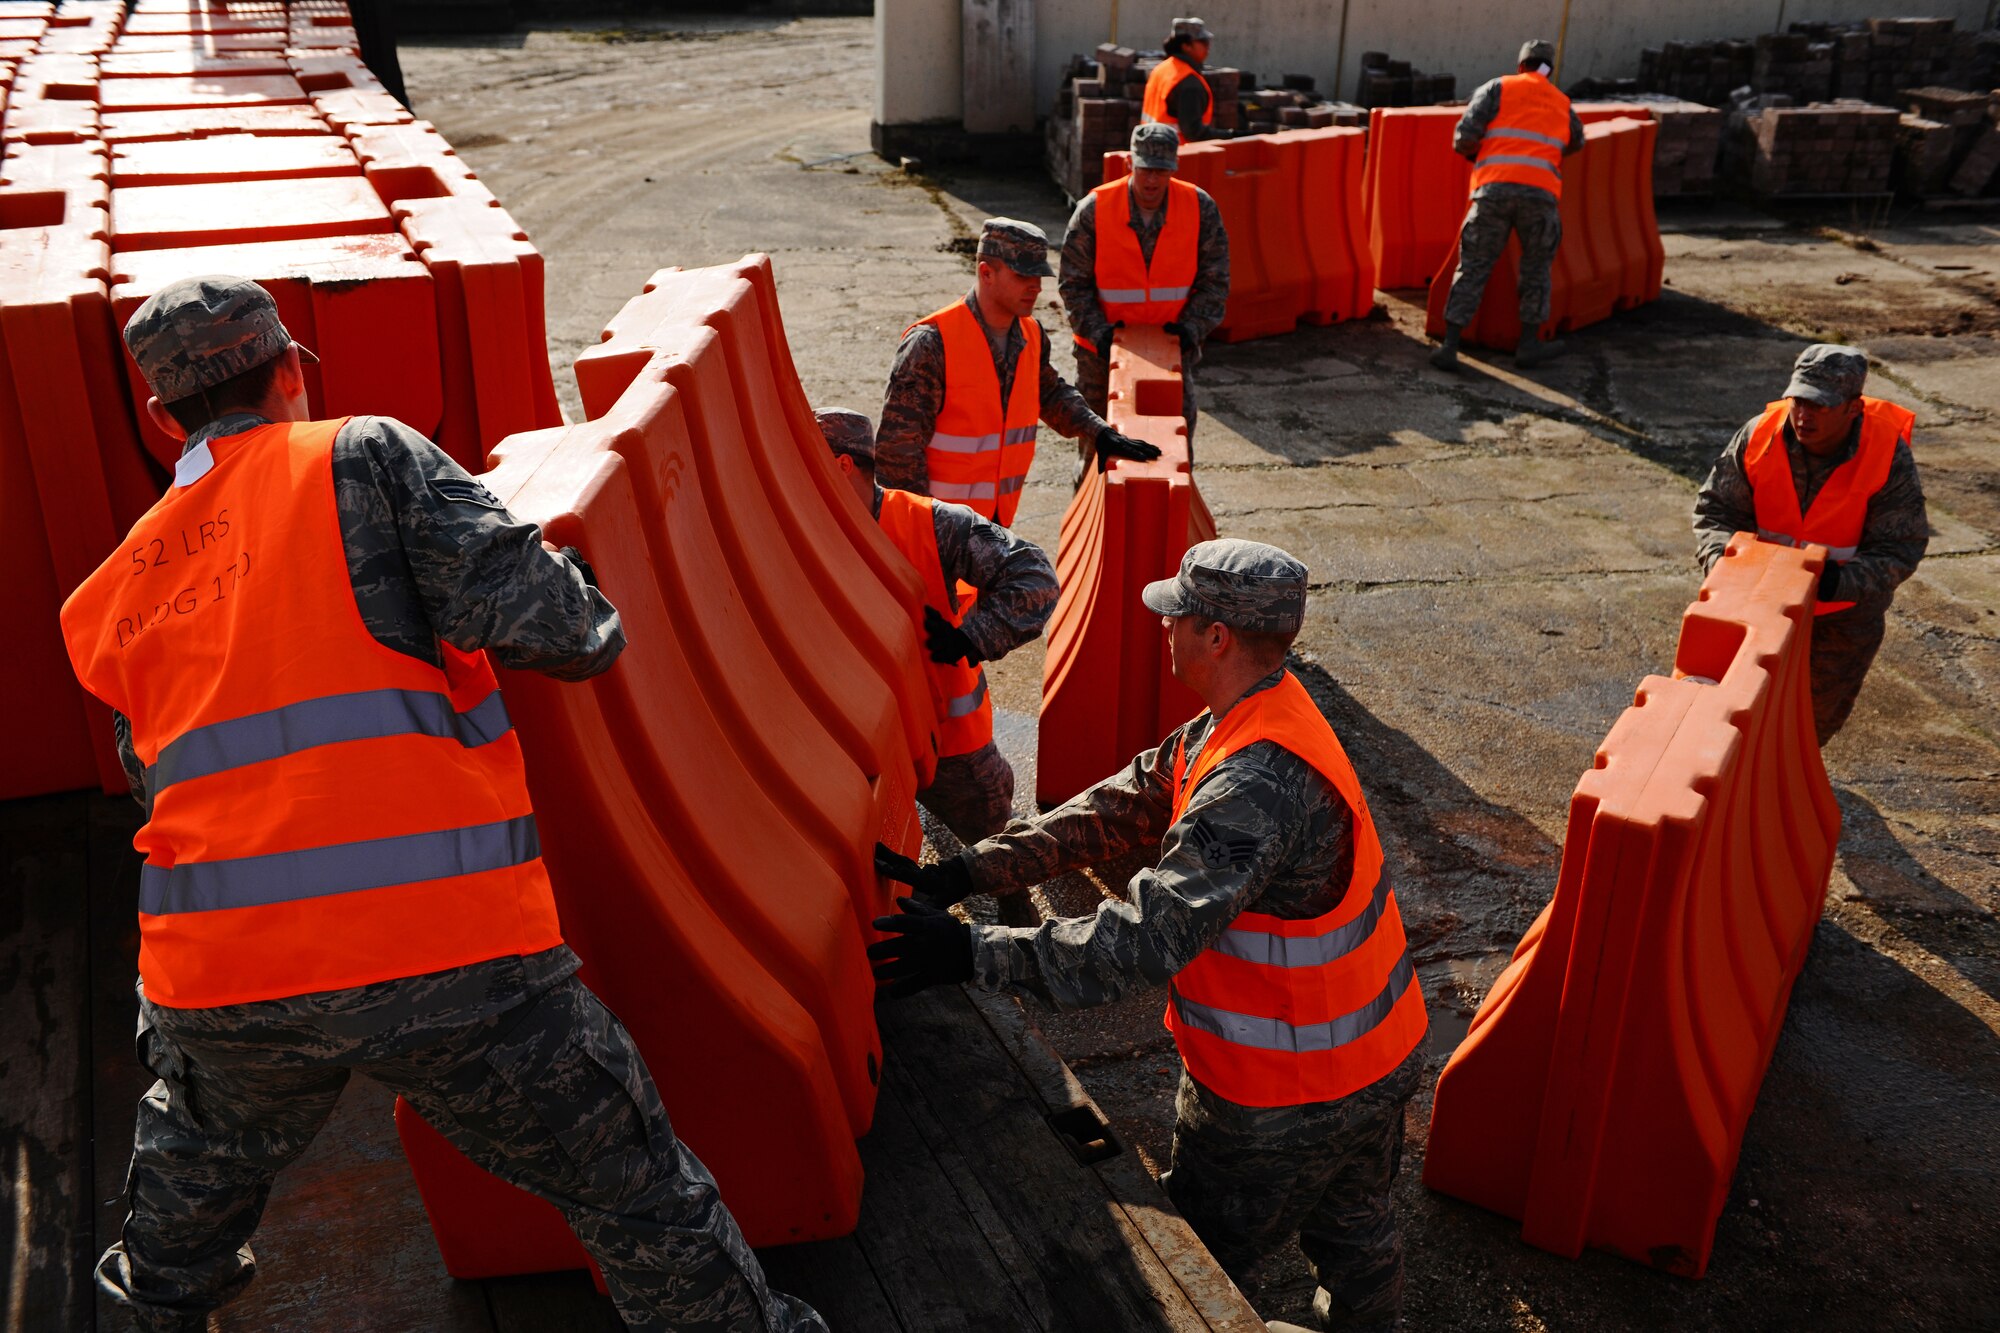 SPANGDAHLEM AIR BASE, Germany – Airmen from the 52nd Logistics Readiness Squadron load barriers onto a transport vehicle during a barrier plan exercise here March 19. LRS Airmen placed barriers to test the base’s ability to respond to an increased defensive posture. The exercise also included a mock car bomb explosion to test the wing’s response to an emergency situation. This type of training prepares first responders to protect the base and U.S. government assets and tests base members’ responses to real-world emergency events. (U.S. Air Force photo by Airman 1st Class Matthew B. Fredericks/Released)